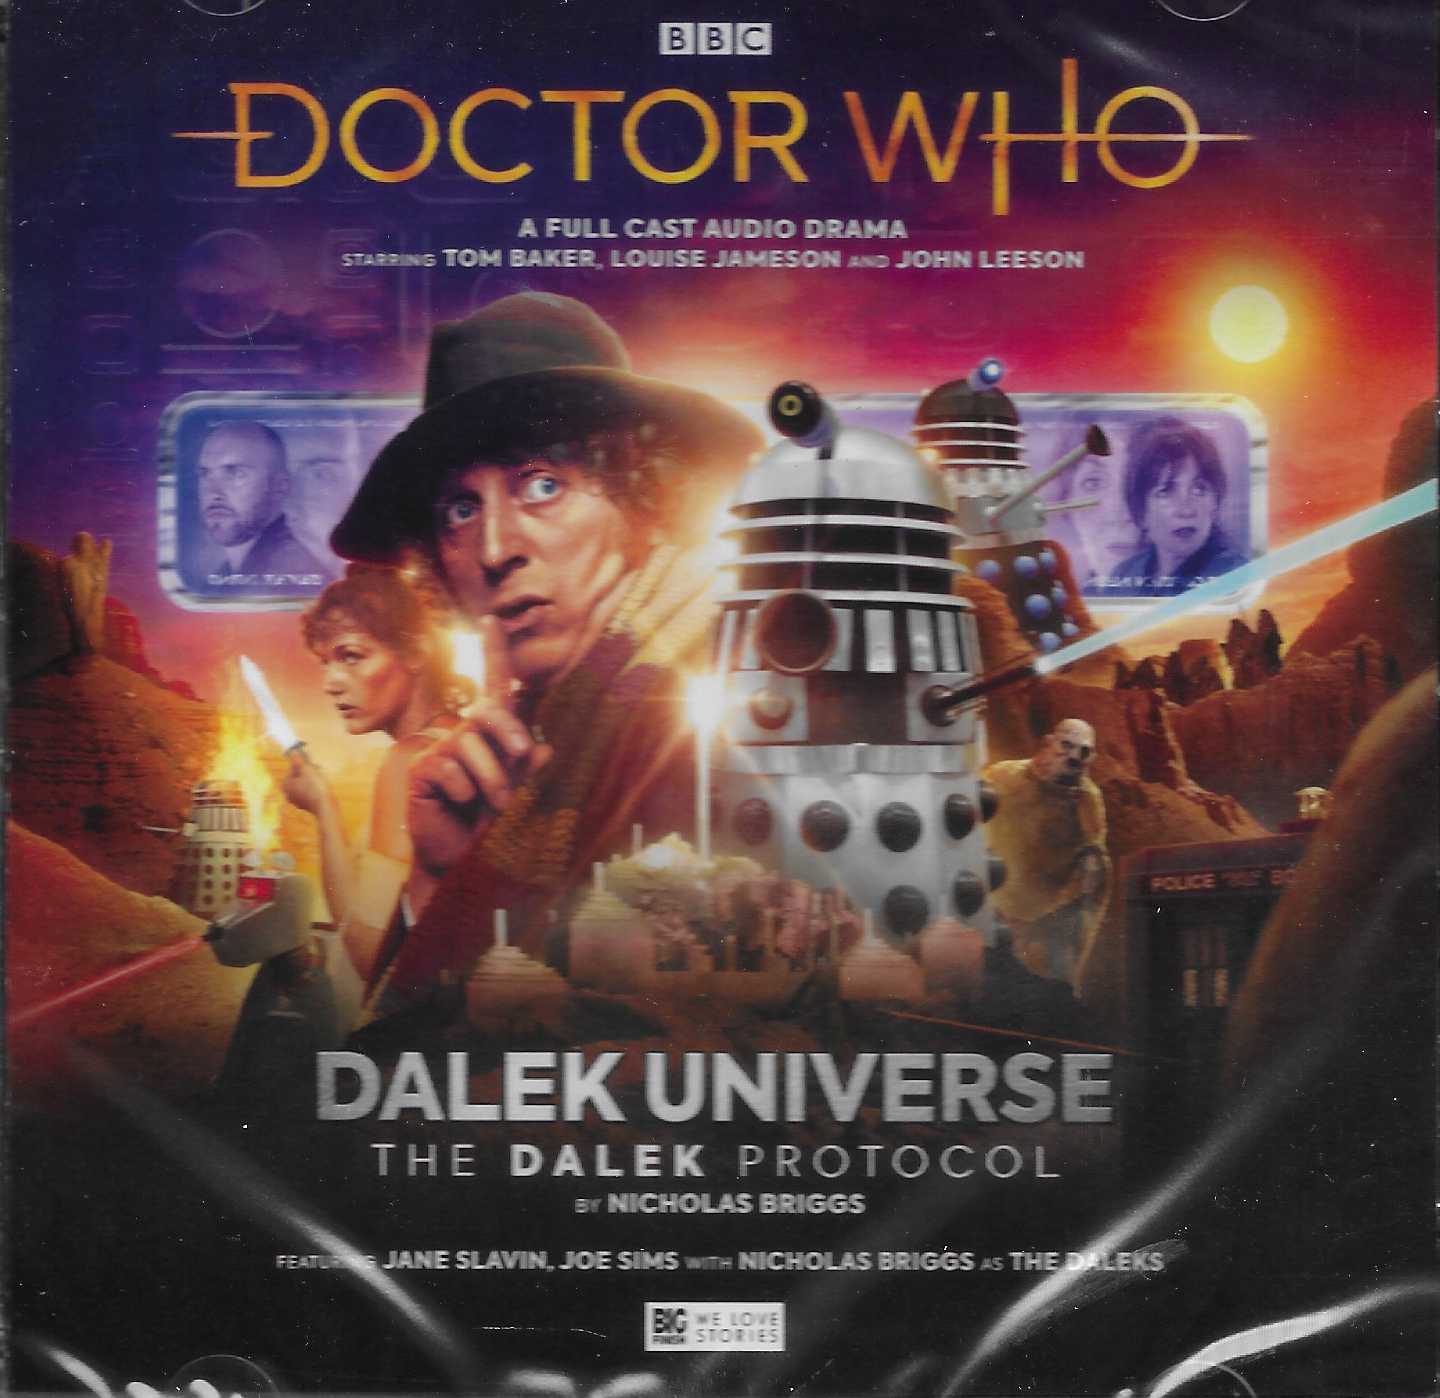 Picture of BFPTOMCD 092 Doctor Who - Dalek universe - The Dalek protocol by artist Nicholas Briggs from the BBC records and Tapes library